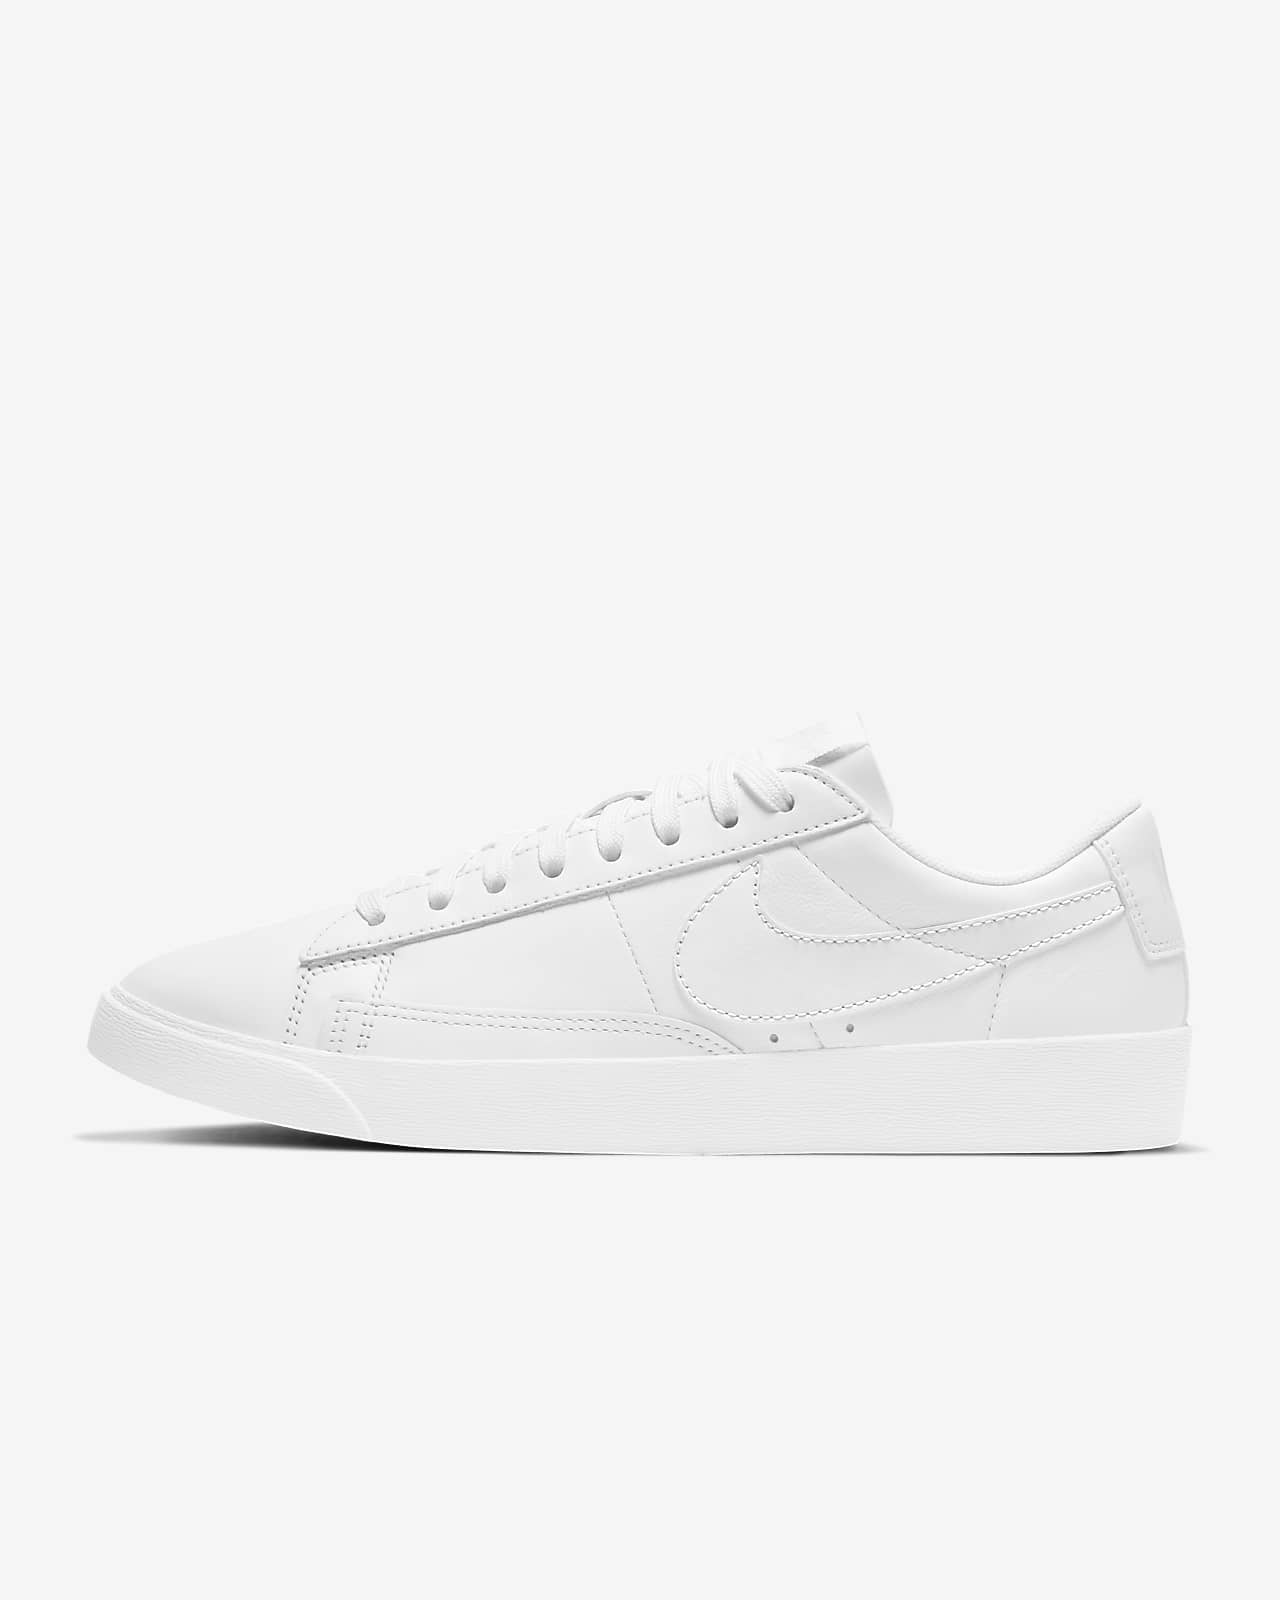 suede nikes womens